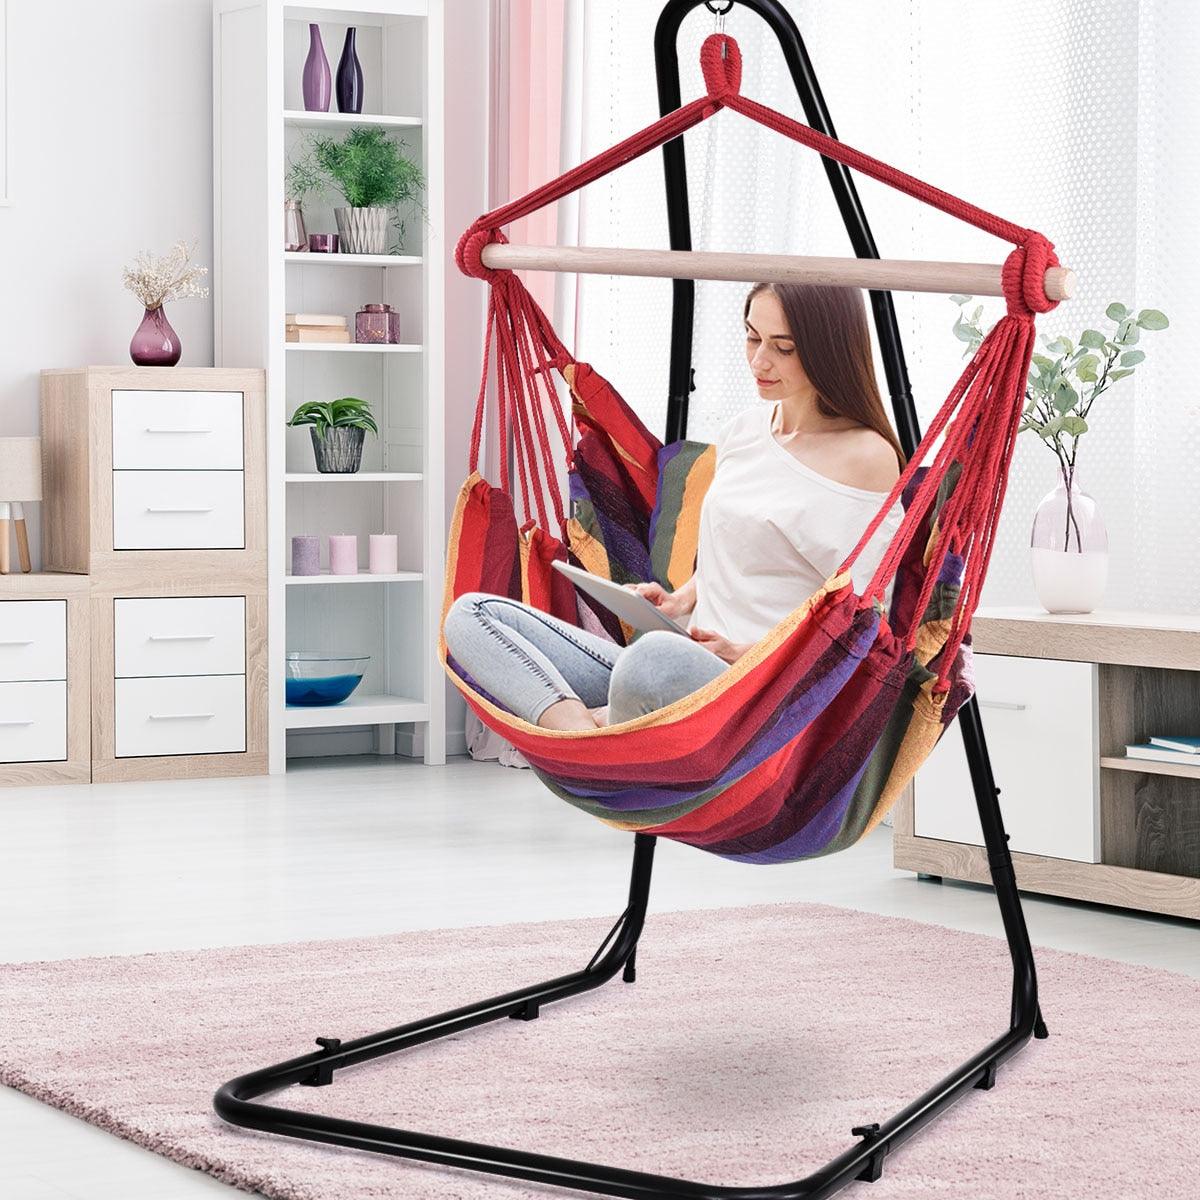 Hammock Rope Chair Patio Porch Yard Tree Hanging Air Swing Outdoor (Red) (D67)(FW2)(1U67)